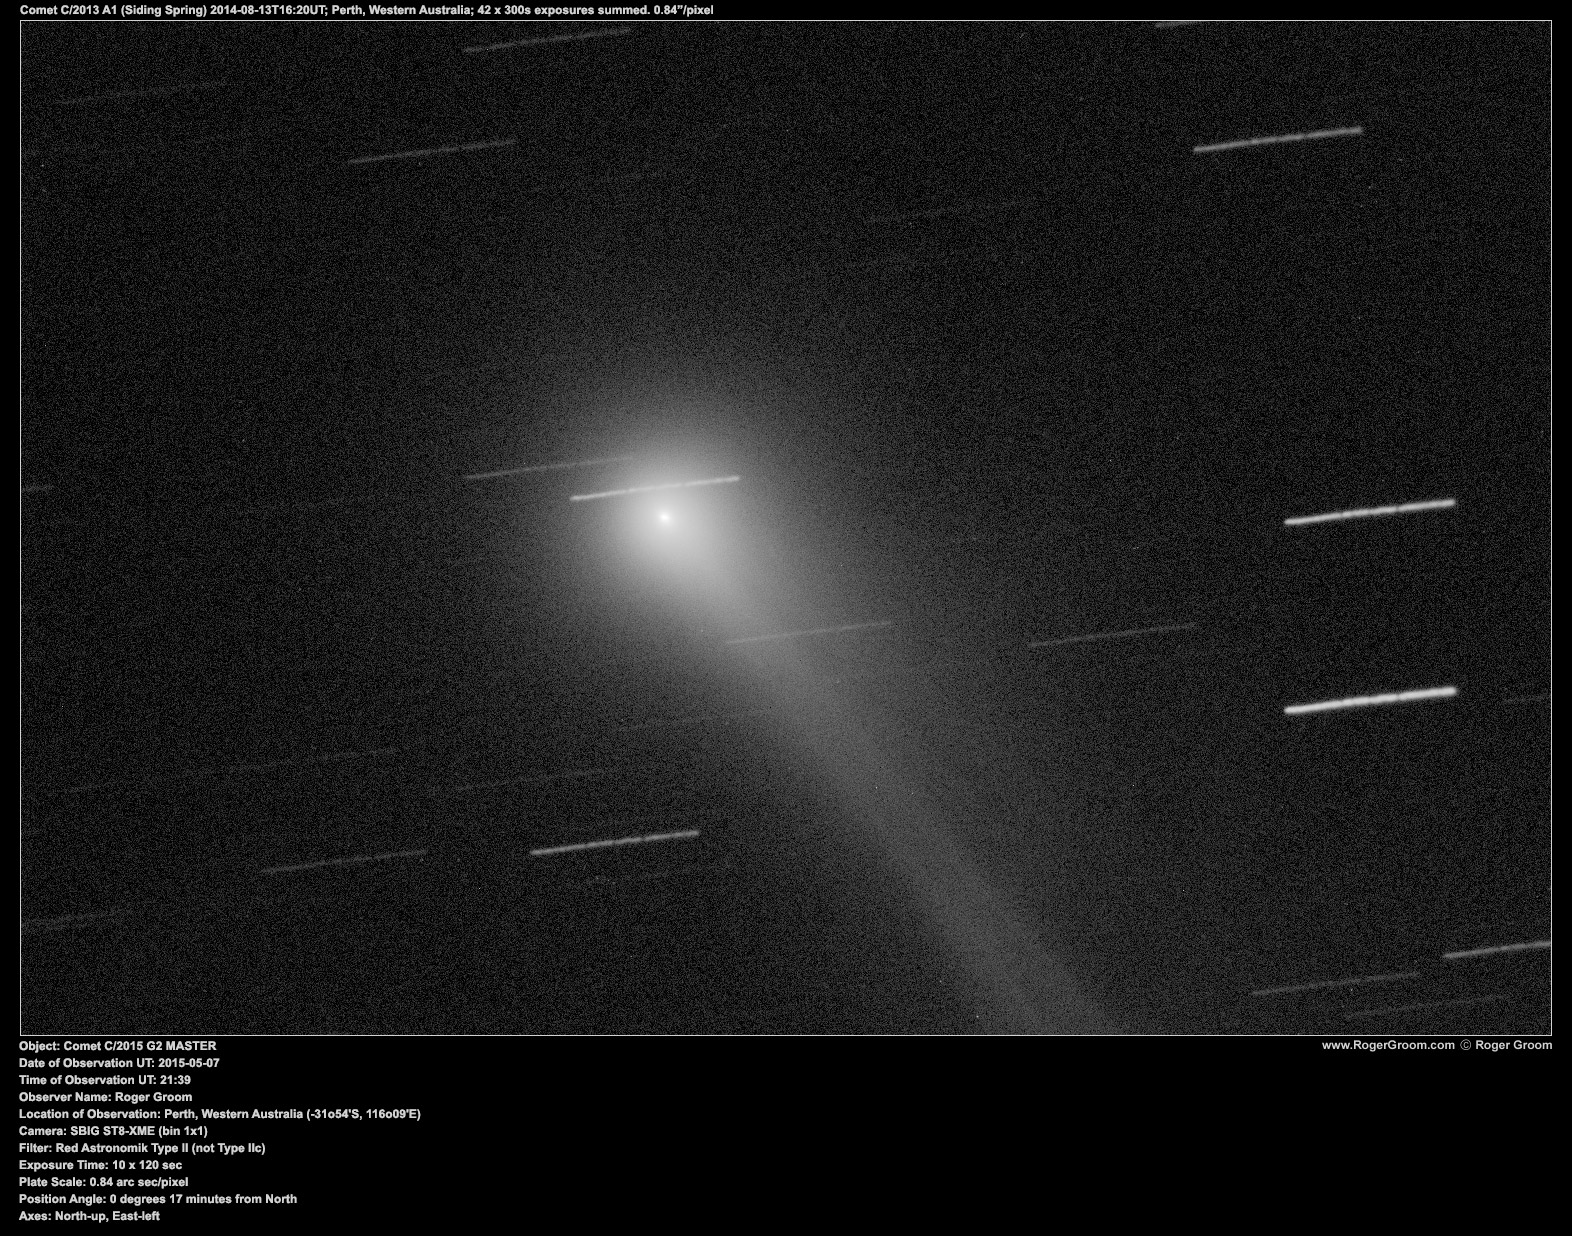 Object: Comet C/2015 G2 MASTER Date of Observation UT: 2015-05-07 Time of Observation UT: 21:39 Observer Name: Roger Groom Location of Observation: Perth, Western Australia (-31o54'S, 116o09'E) Camera: SBIG ST8-XME (bin 1x1) Filter: Red Astronomik Type II (not Type IIc) Exposure Time: 10 x 120 sec Plate Scale: 0.84 arc sec/pixel Position Angle: 0 degrees 17 minutes from North Axes: North-up, East-left